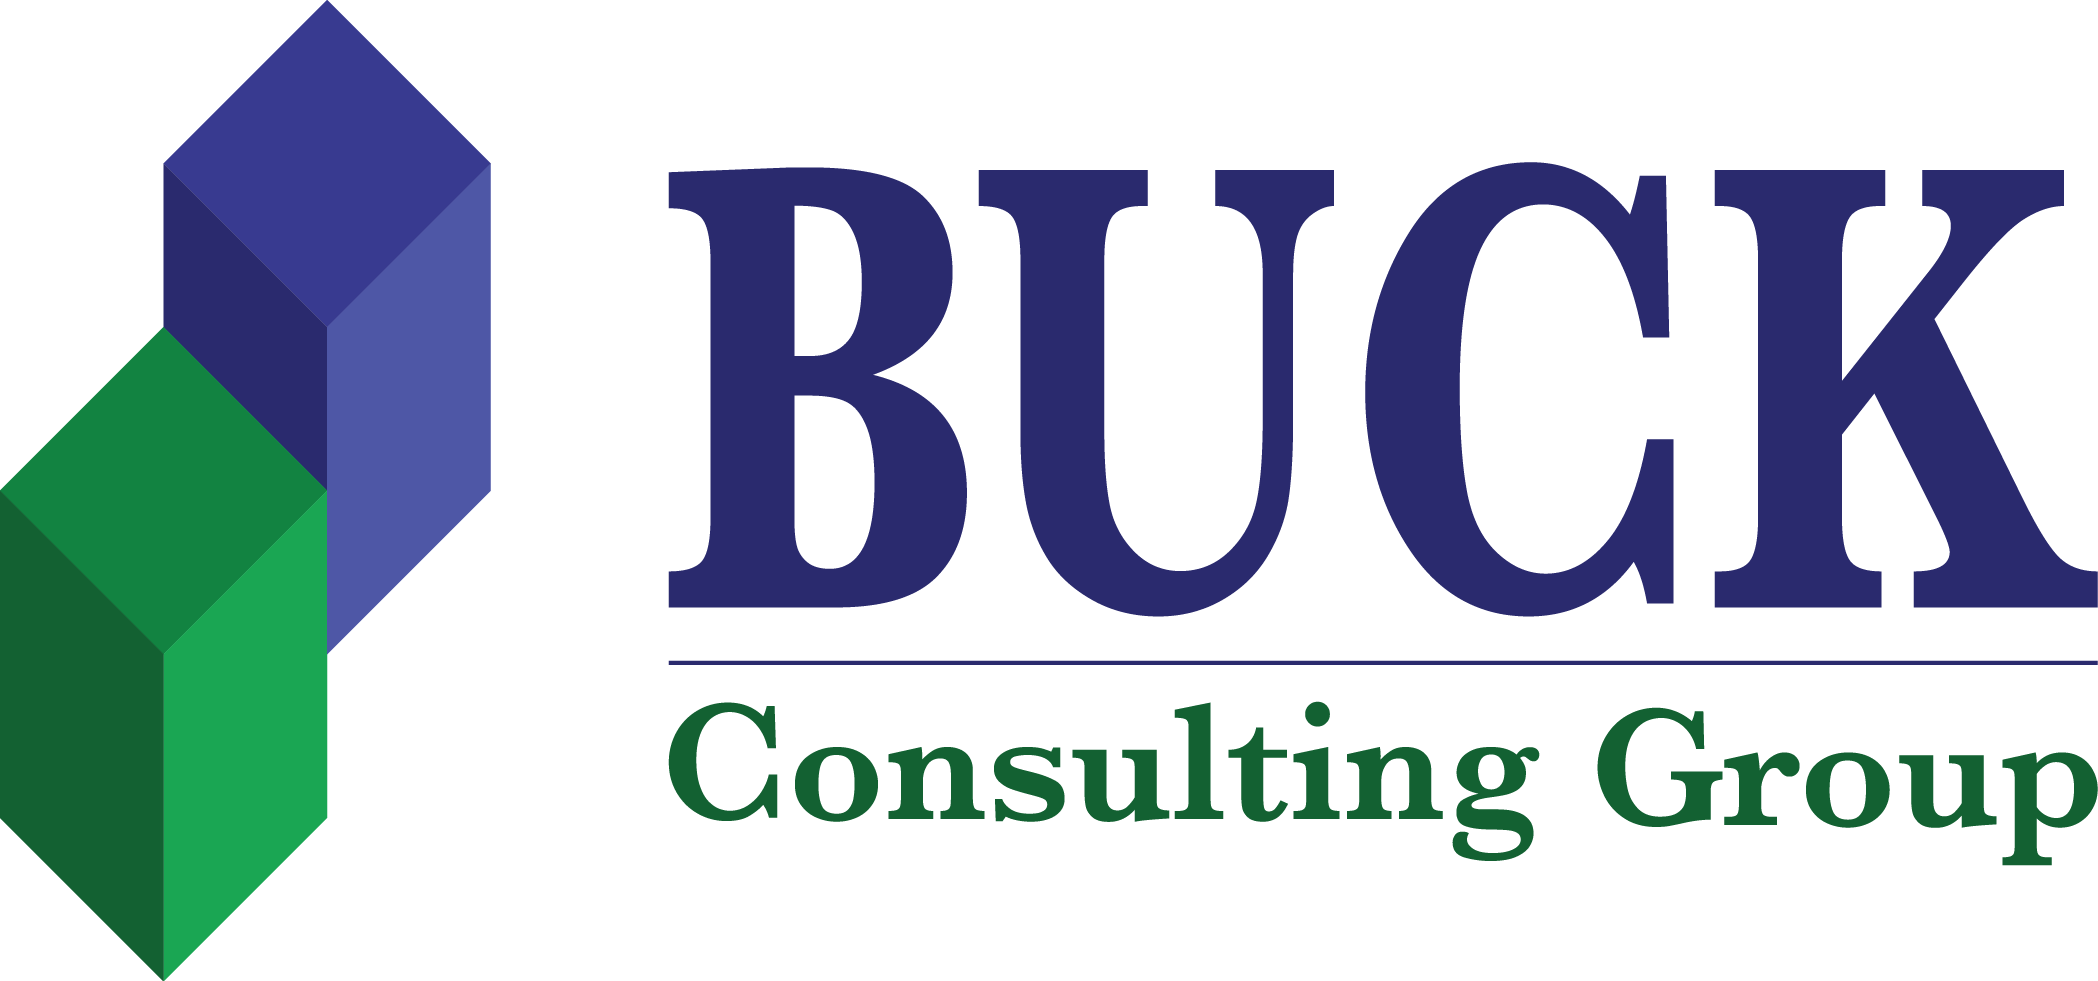 The Buck Consulting Group